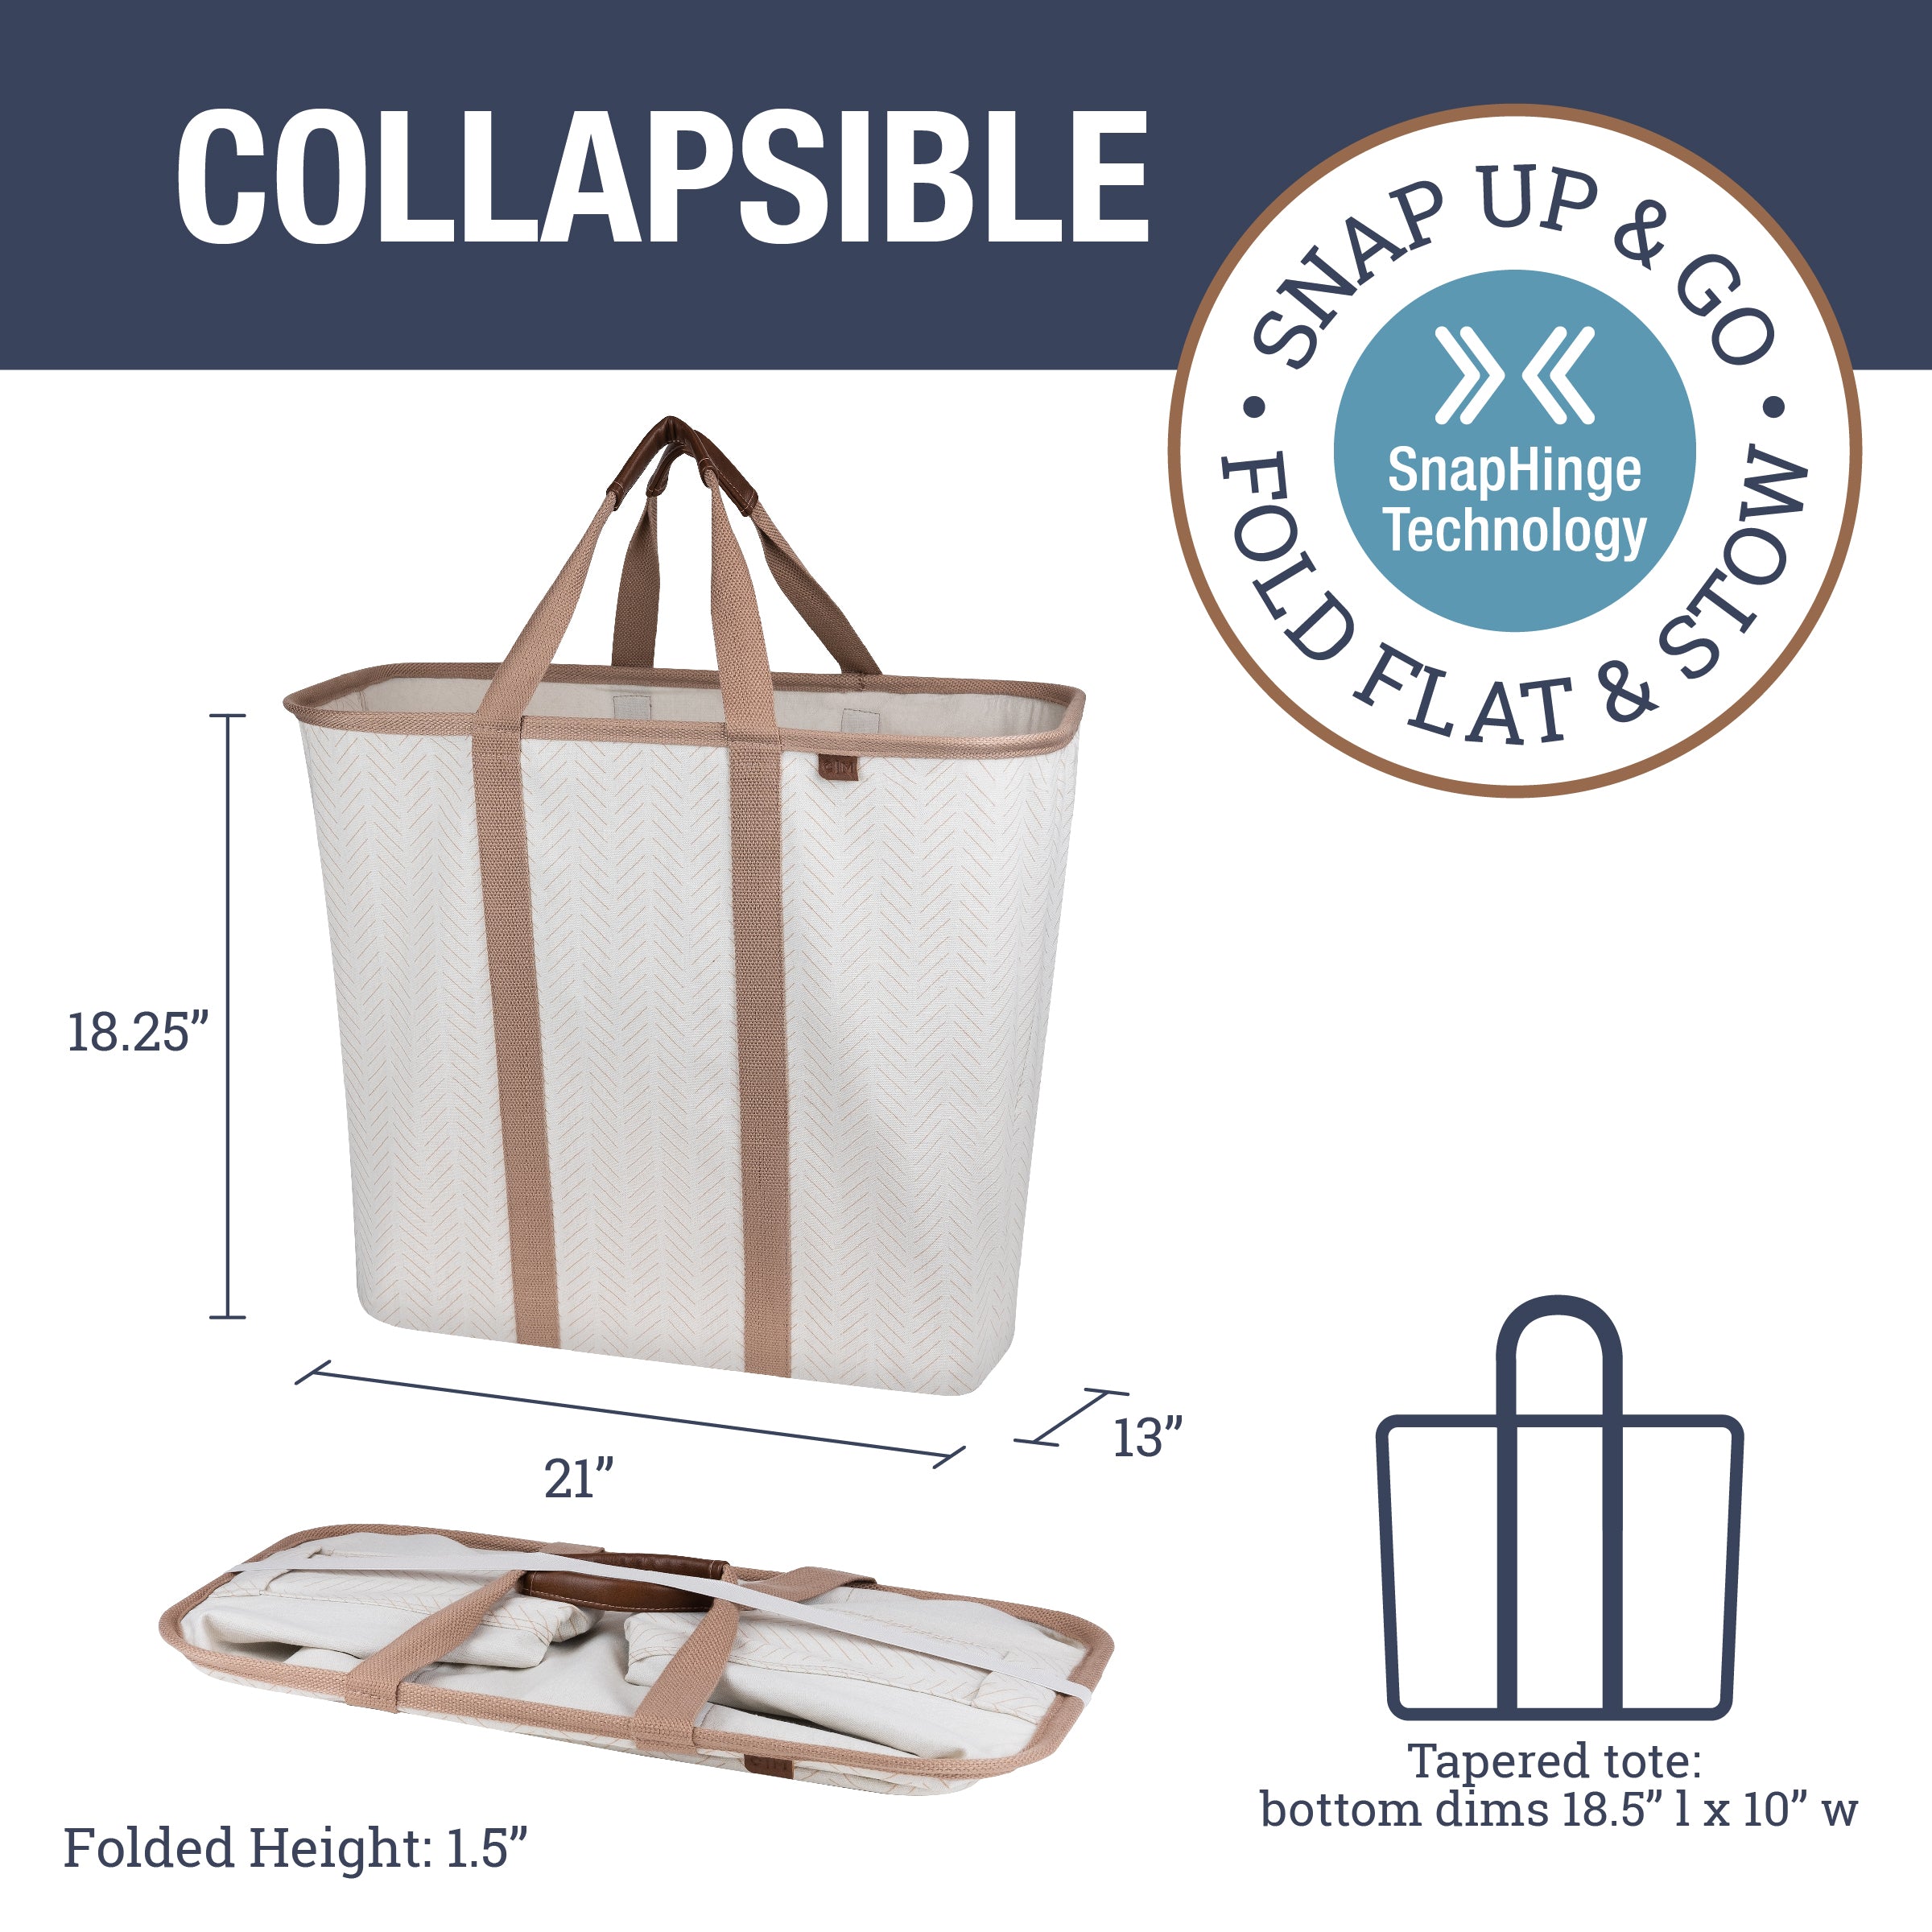 Collapsible Laundry Caddy - CleverMade